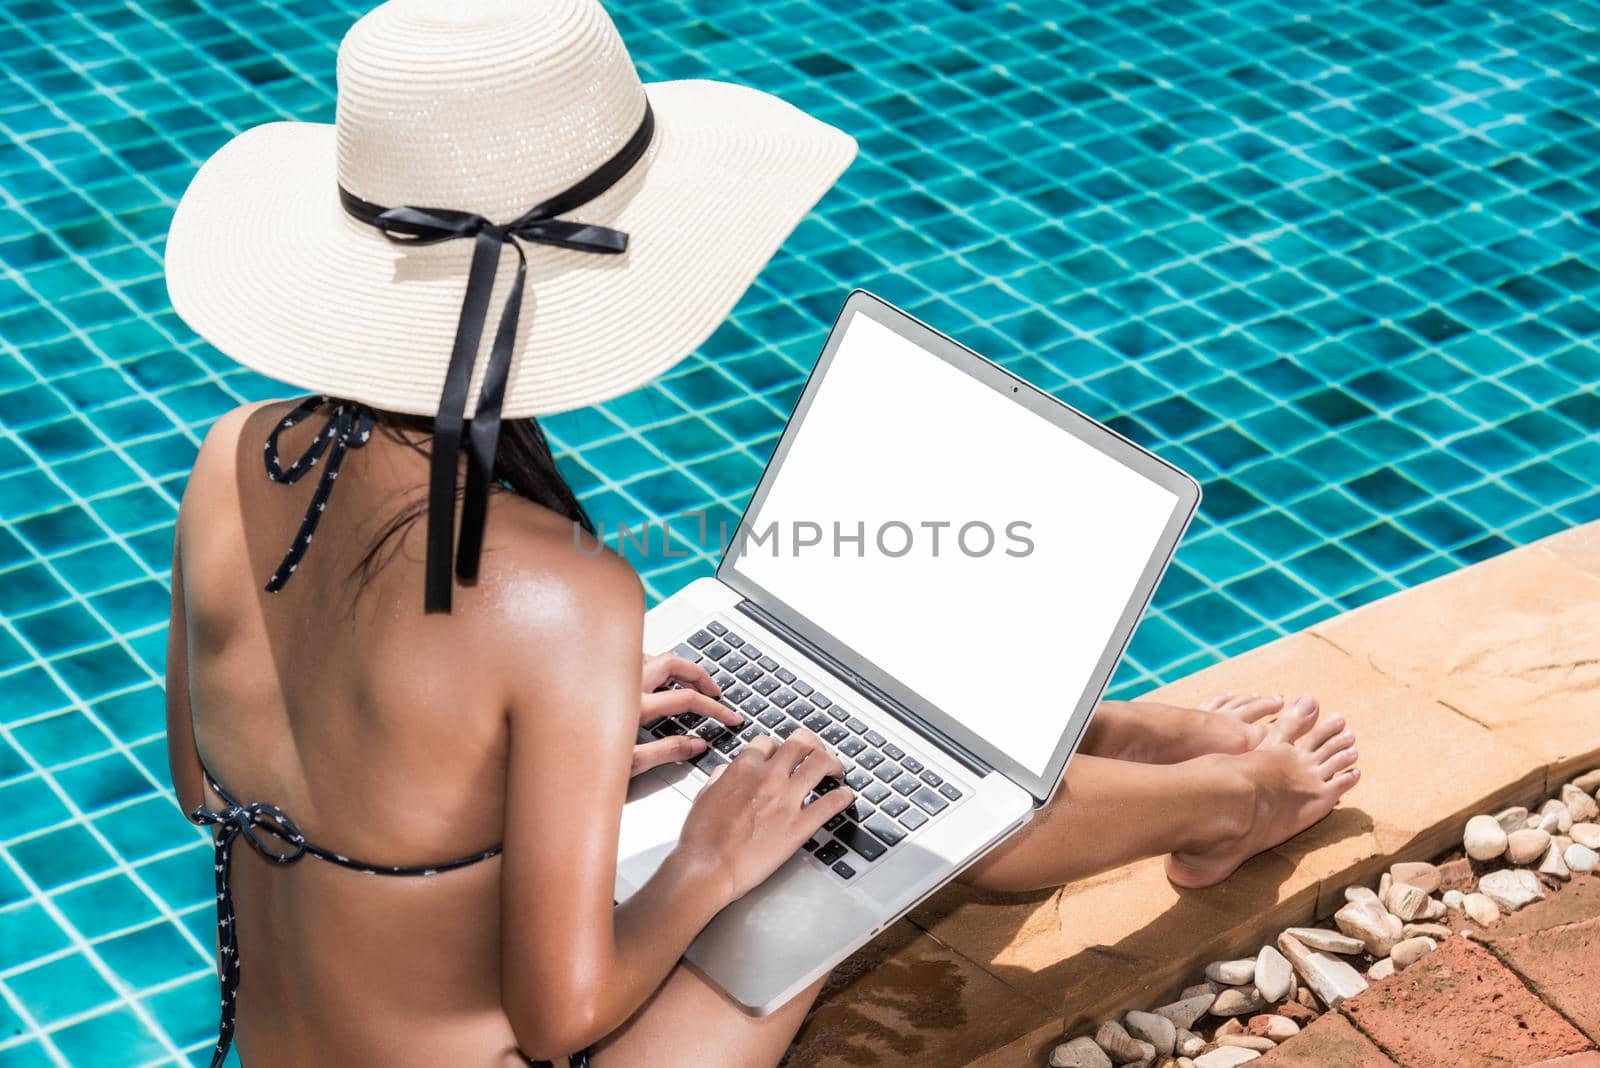 Asian Woman working on laptop computer sitting at poolside by Sorapop